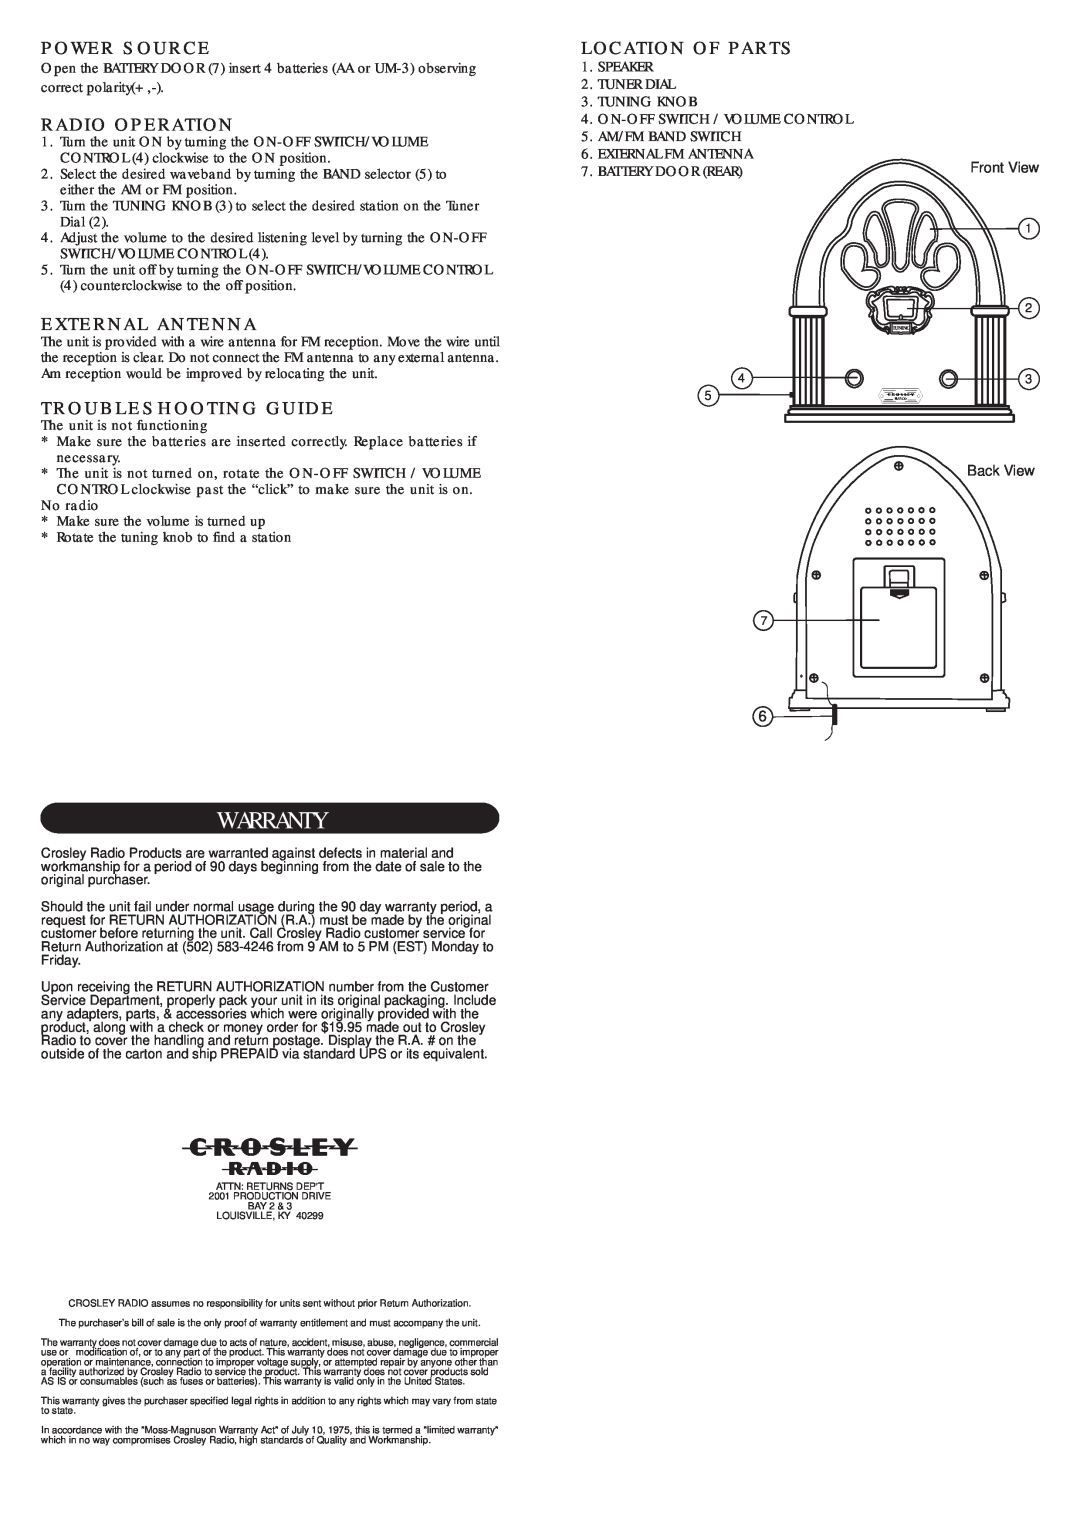 Crosley Radio CR82 Warranty, Power Source, Radio Operation, External Antenna, Troubleshooting Guide, Location Of Parts 